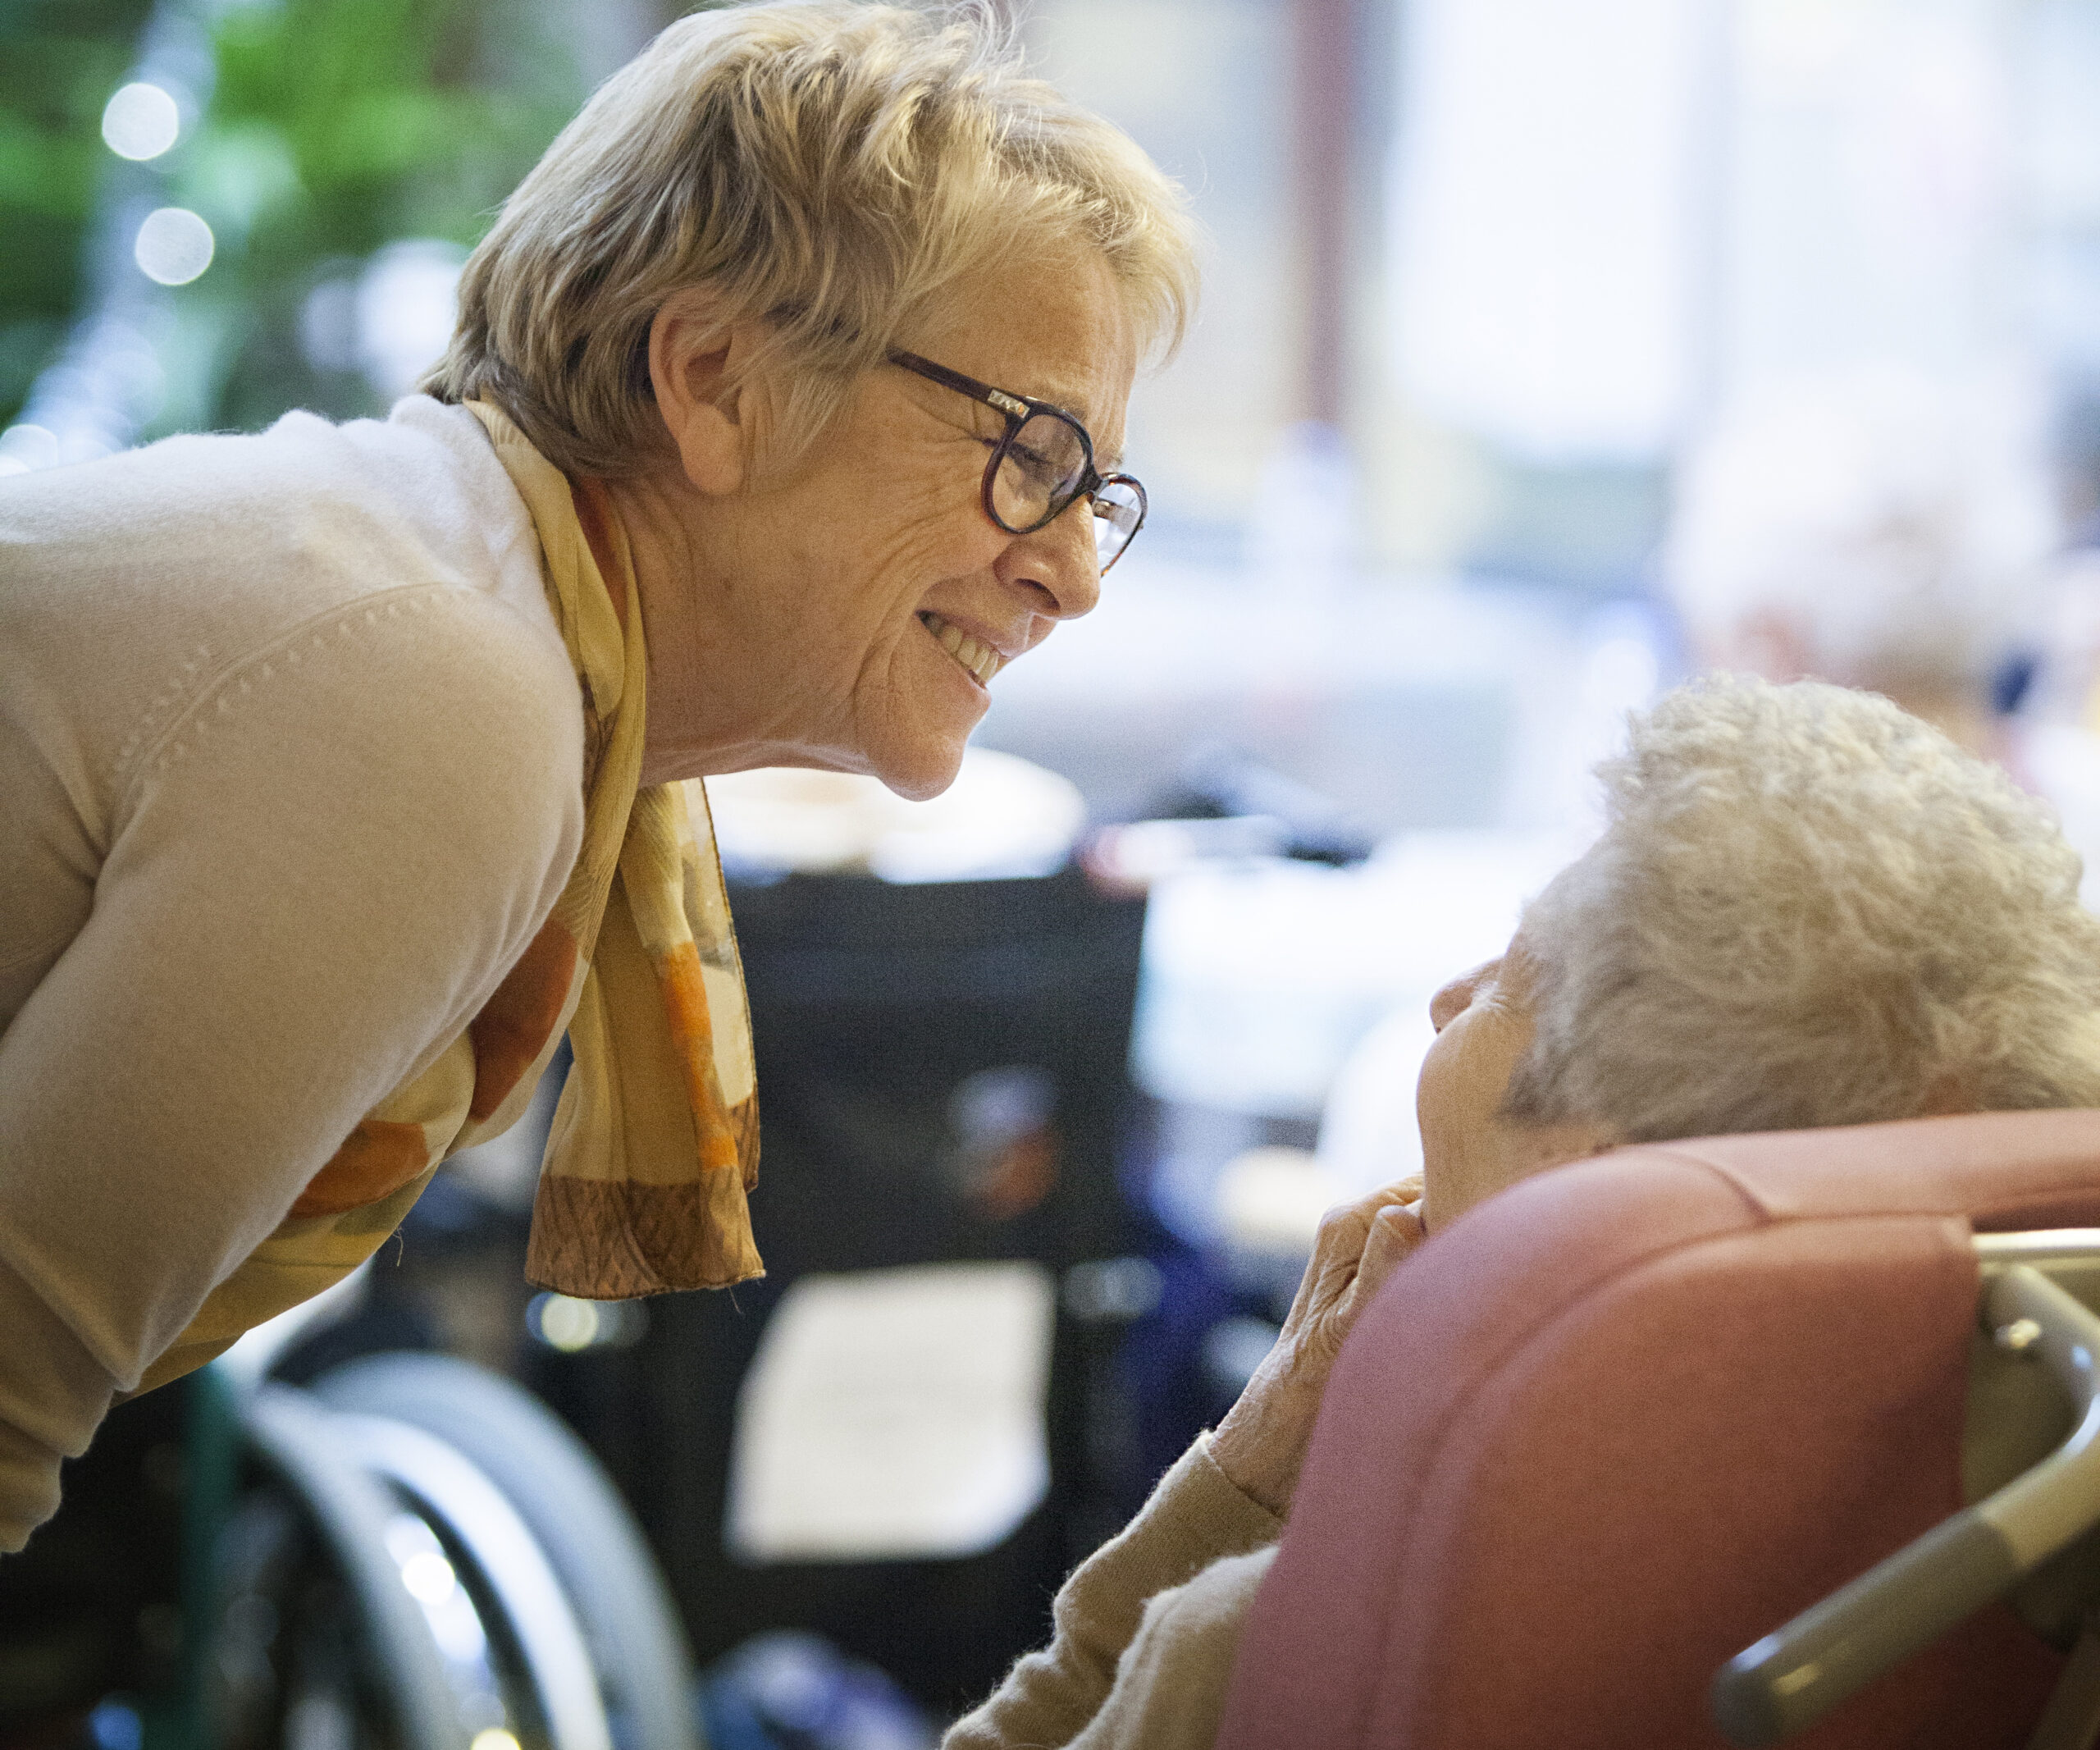 Tips for preparing parents for the transition into aged care